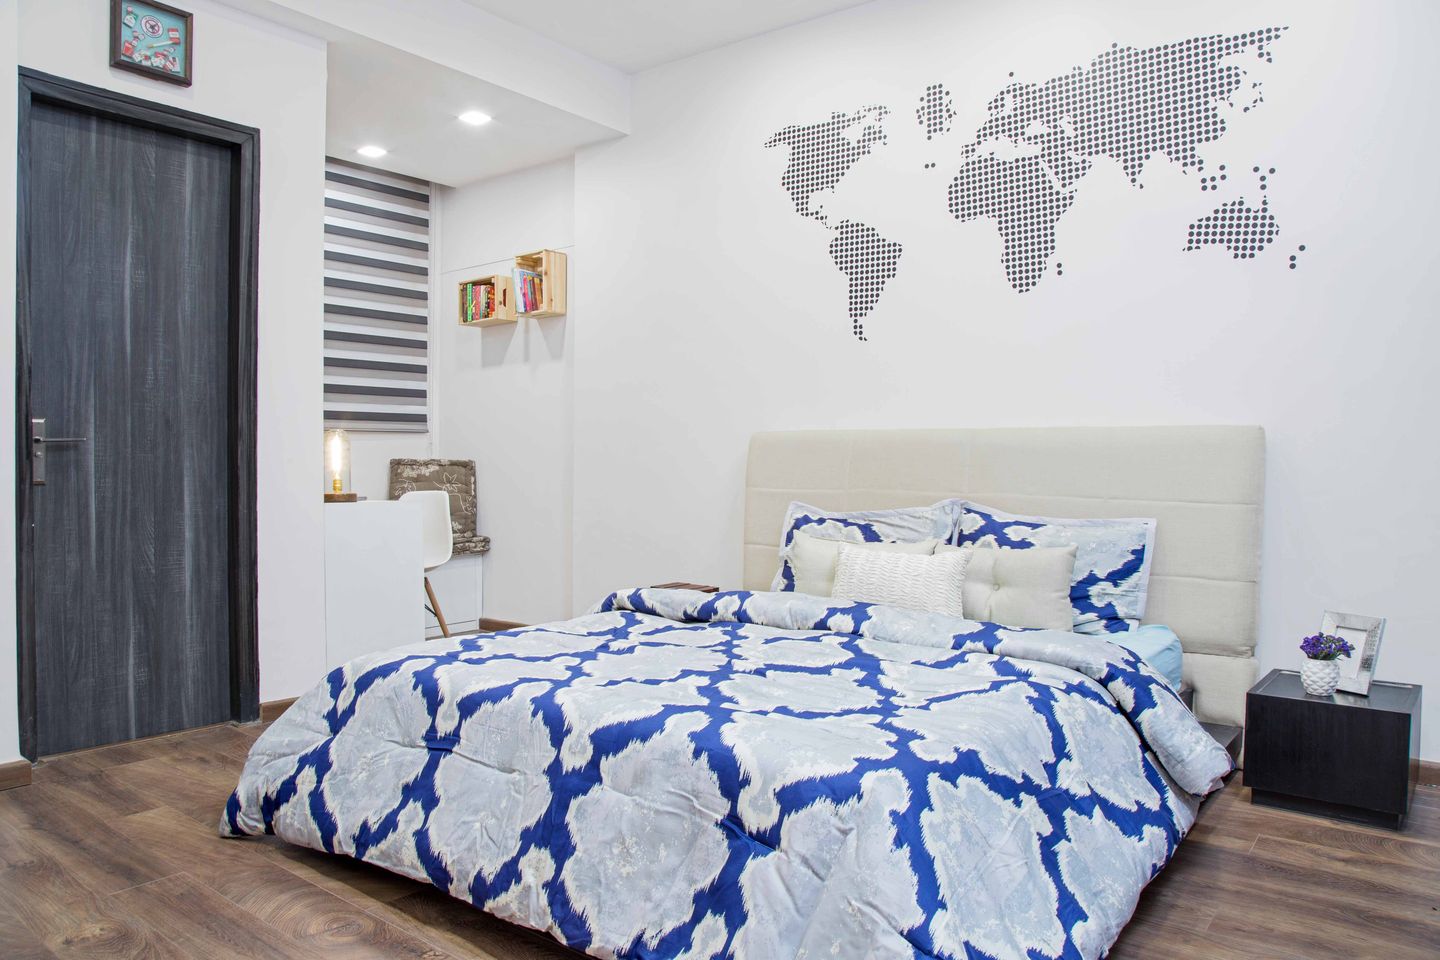 12X9 Ft Guest Room Design With World Map Stencil - Livspace